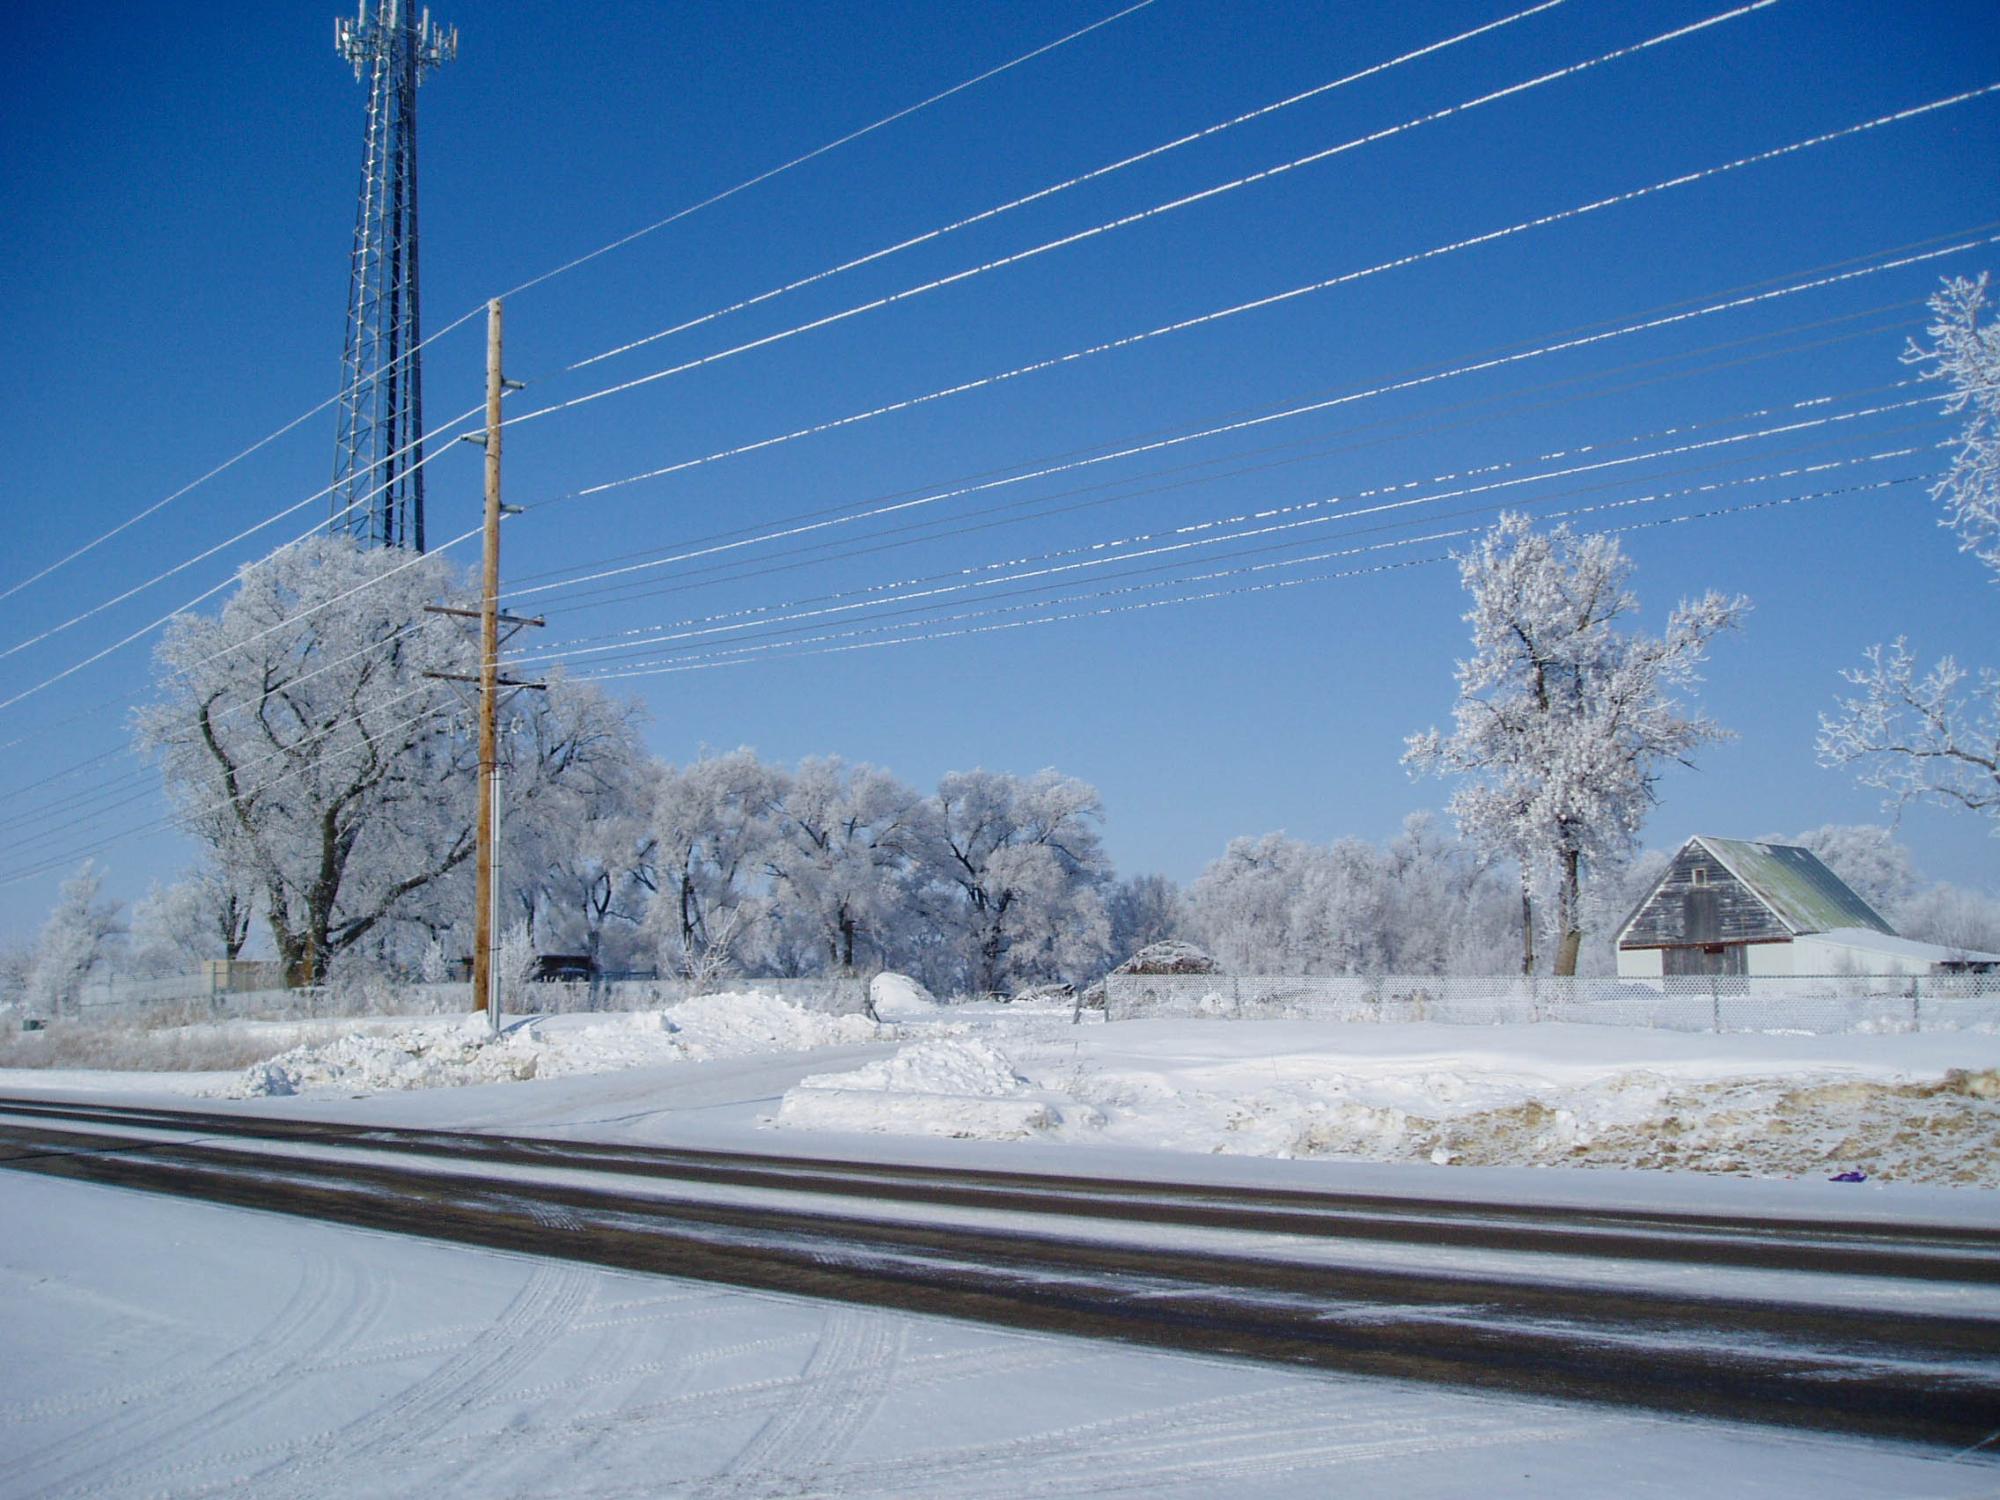 A plowed two-lane road traverses a snow-covered landscape.